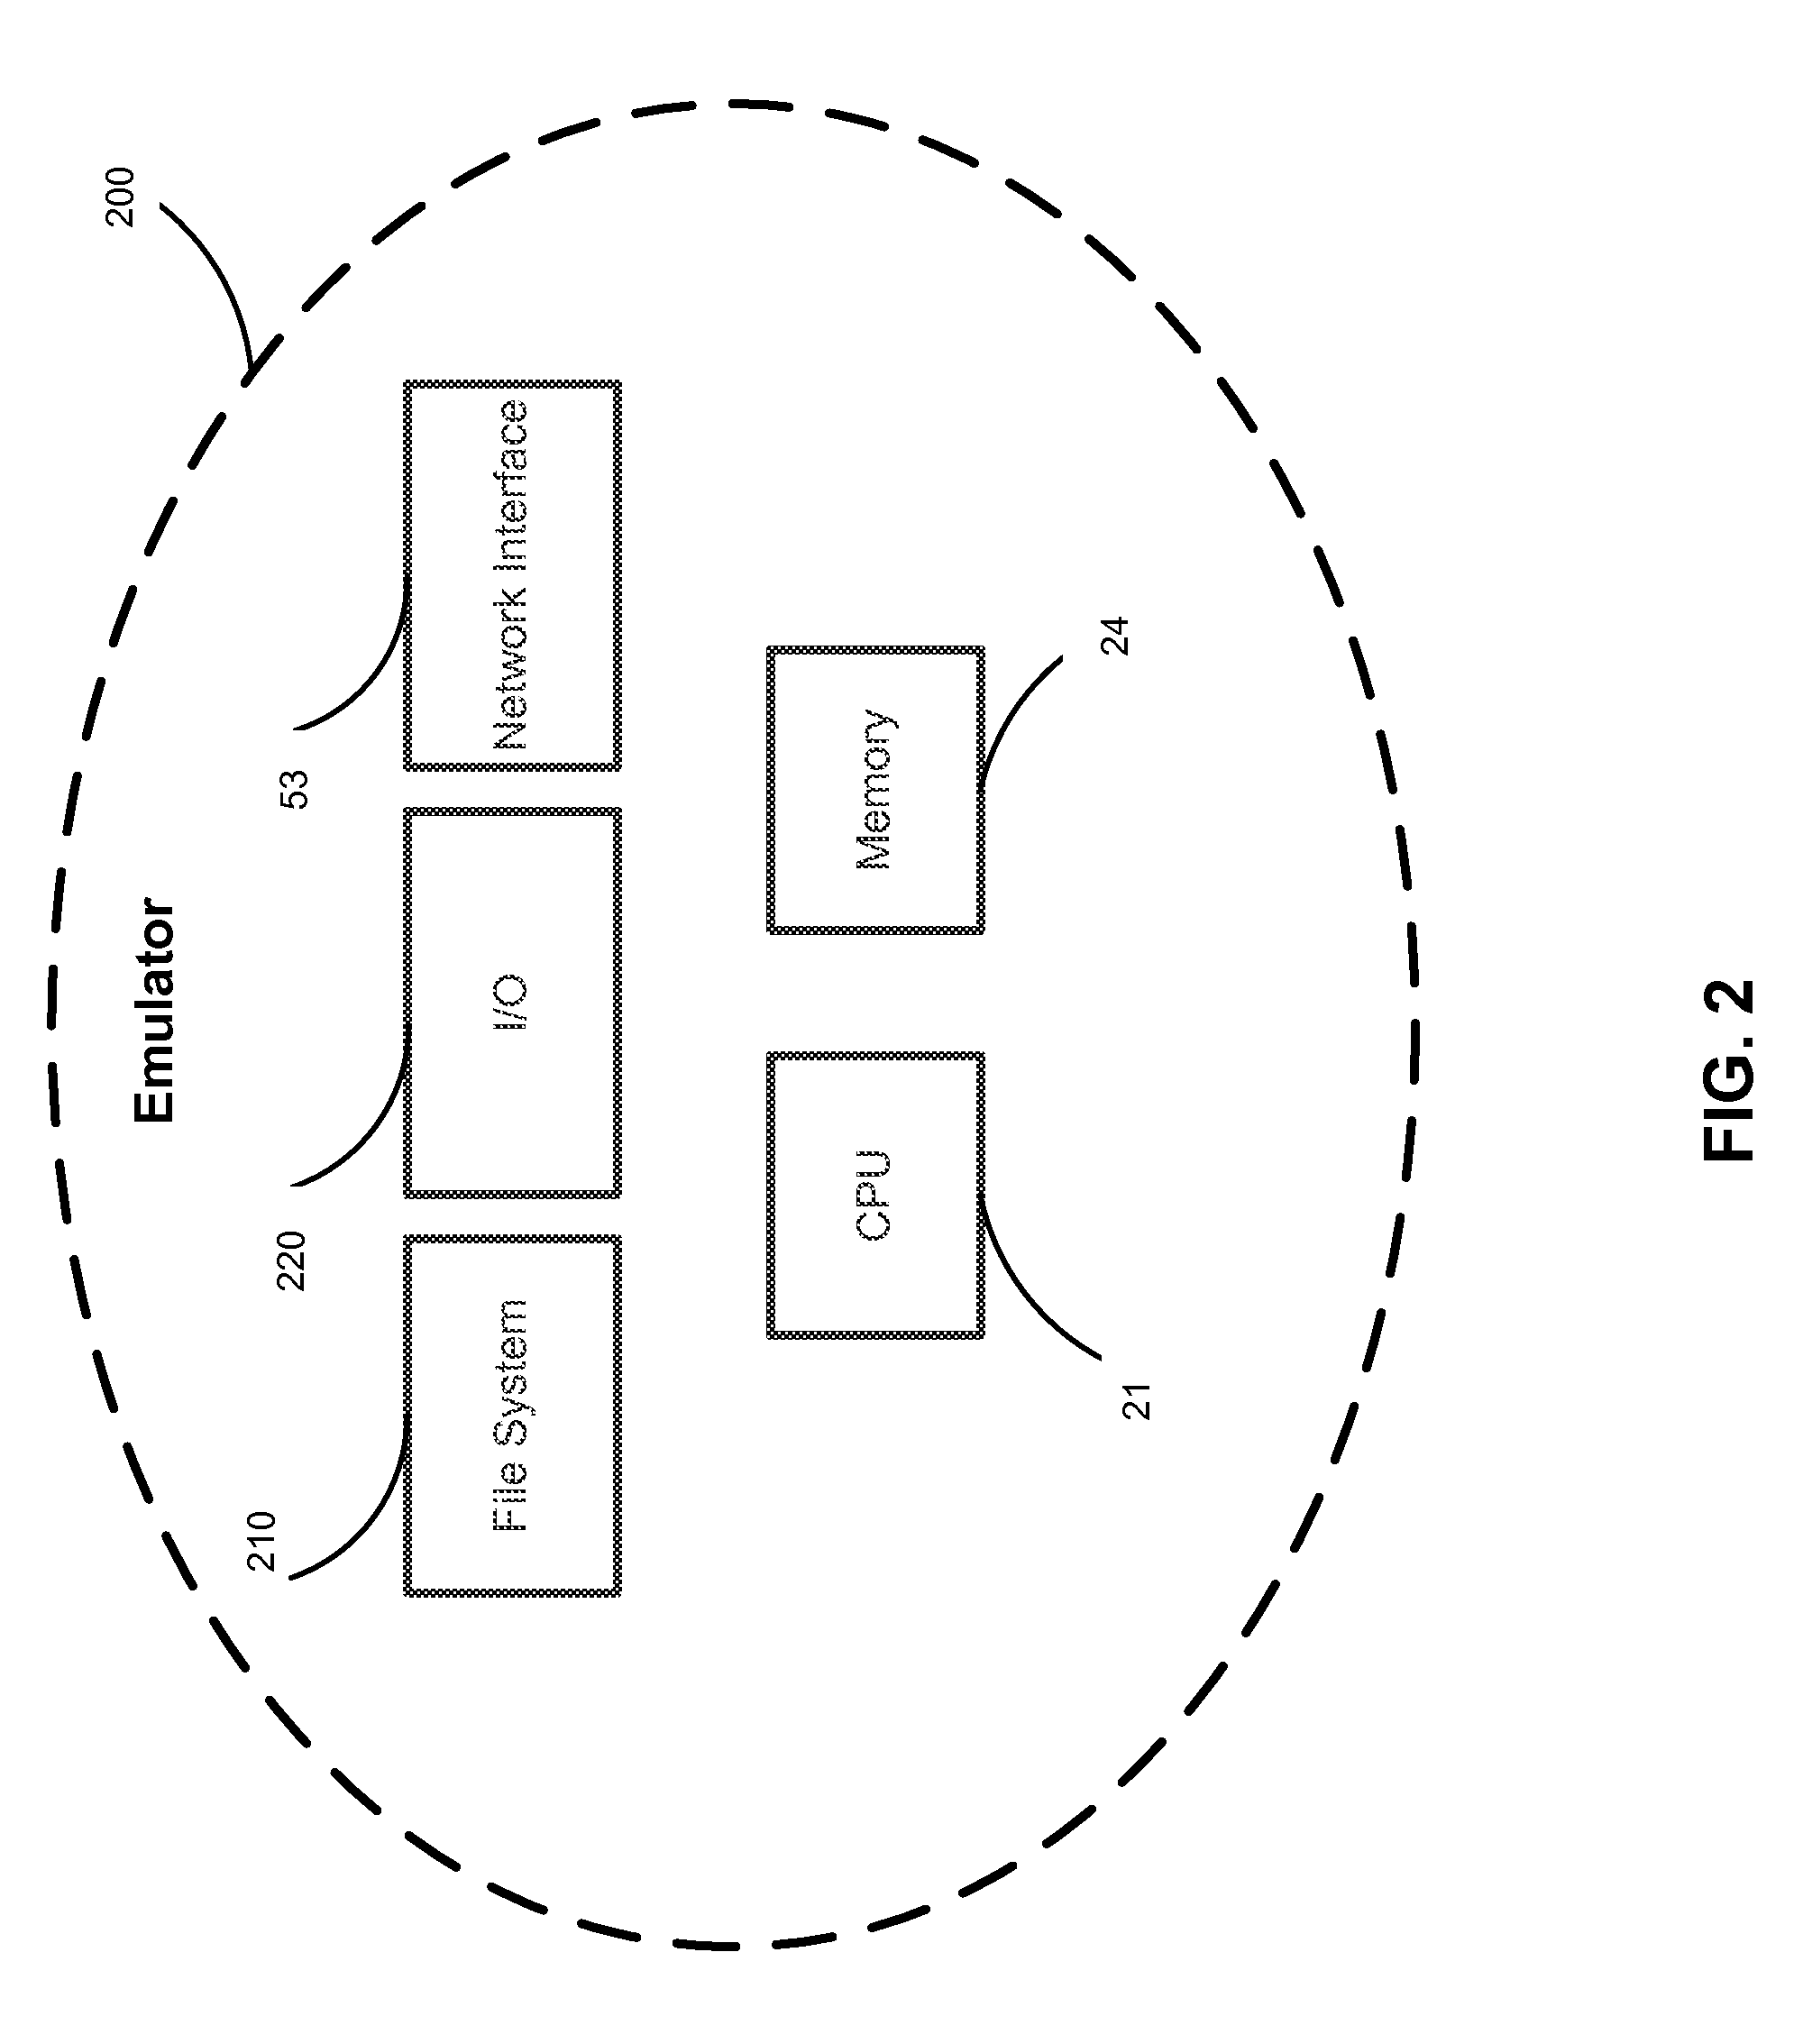 Method for accelerating hardware emulator used for malware detection and analysis